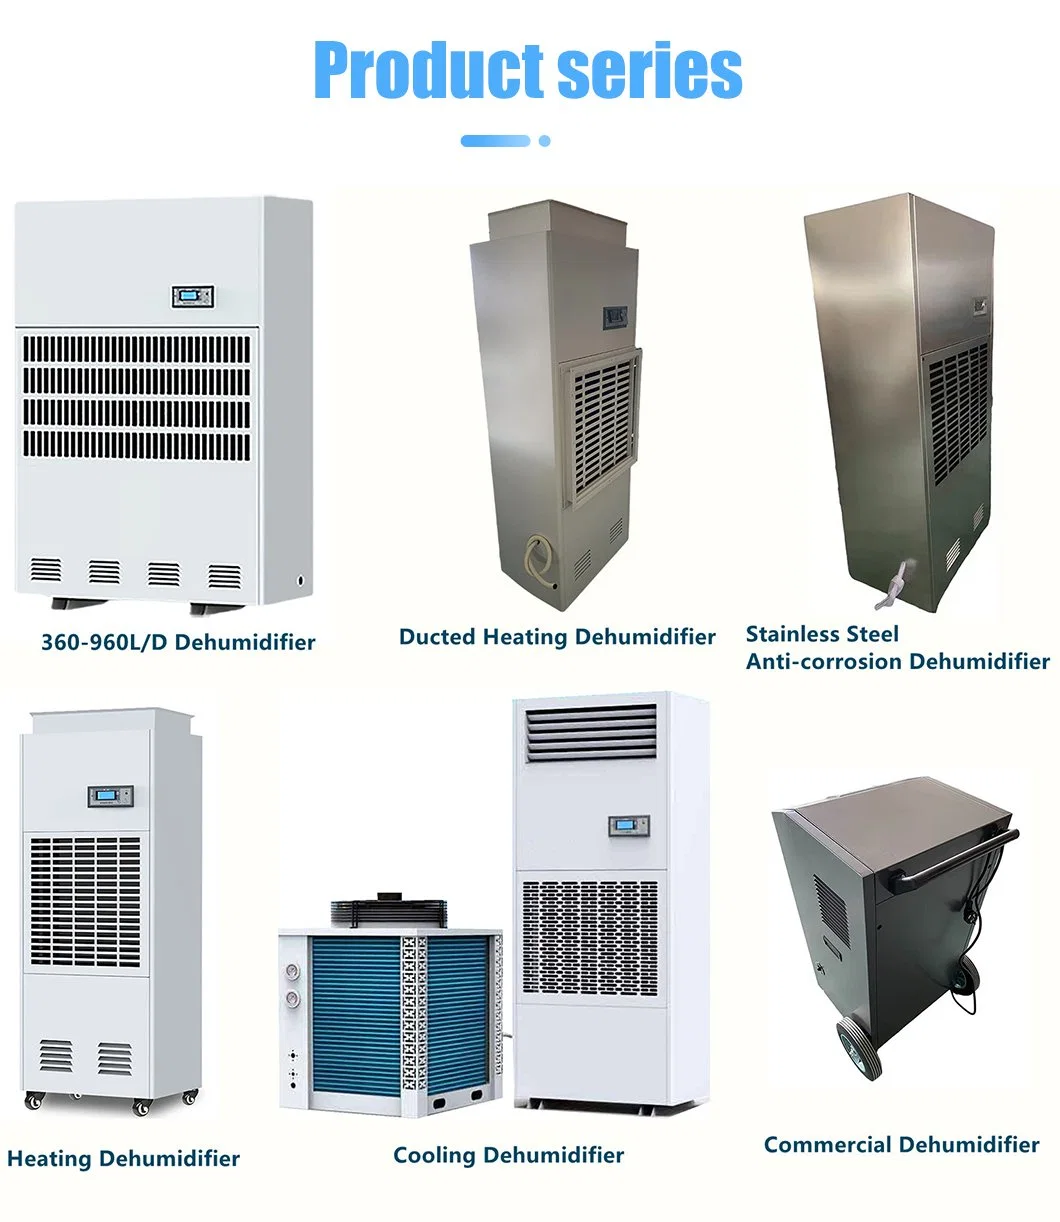 CE Approved Easy to Move 138L Industrial Commercial Dehumidifier with Cheap Price